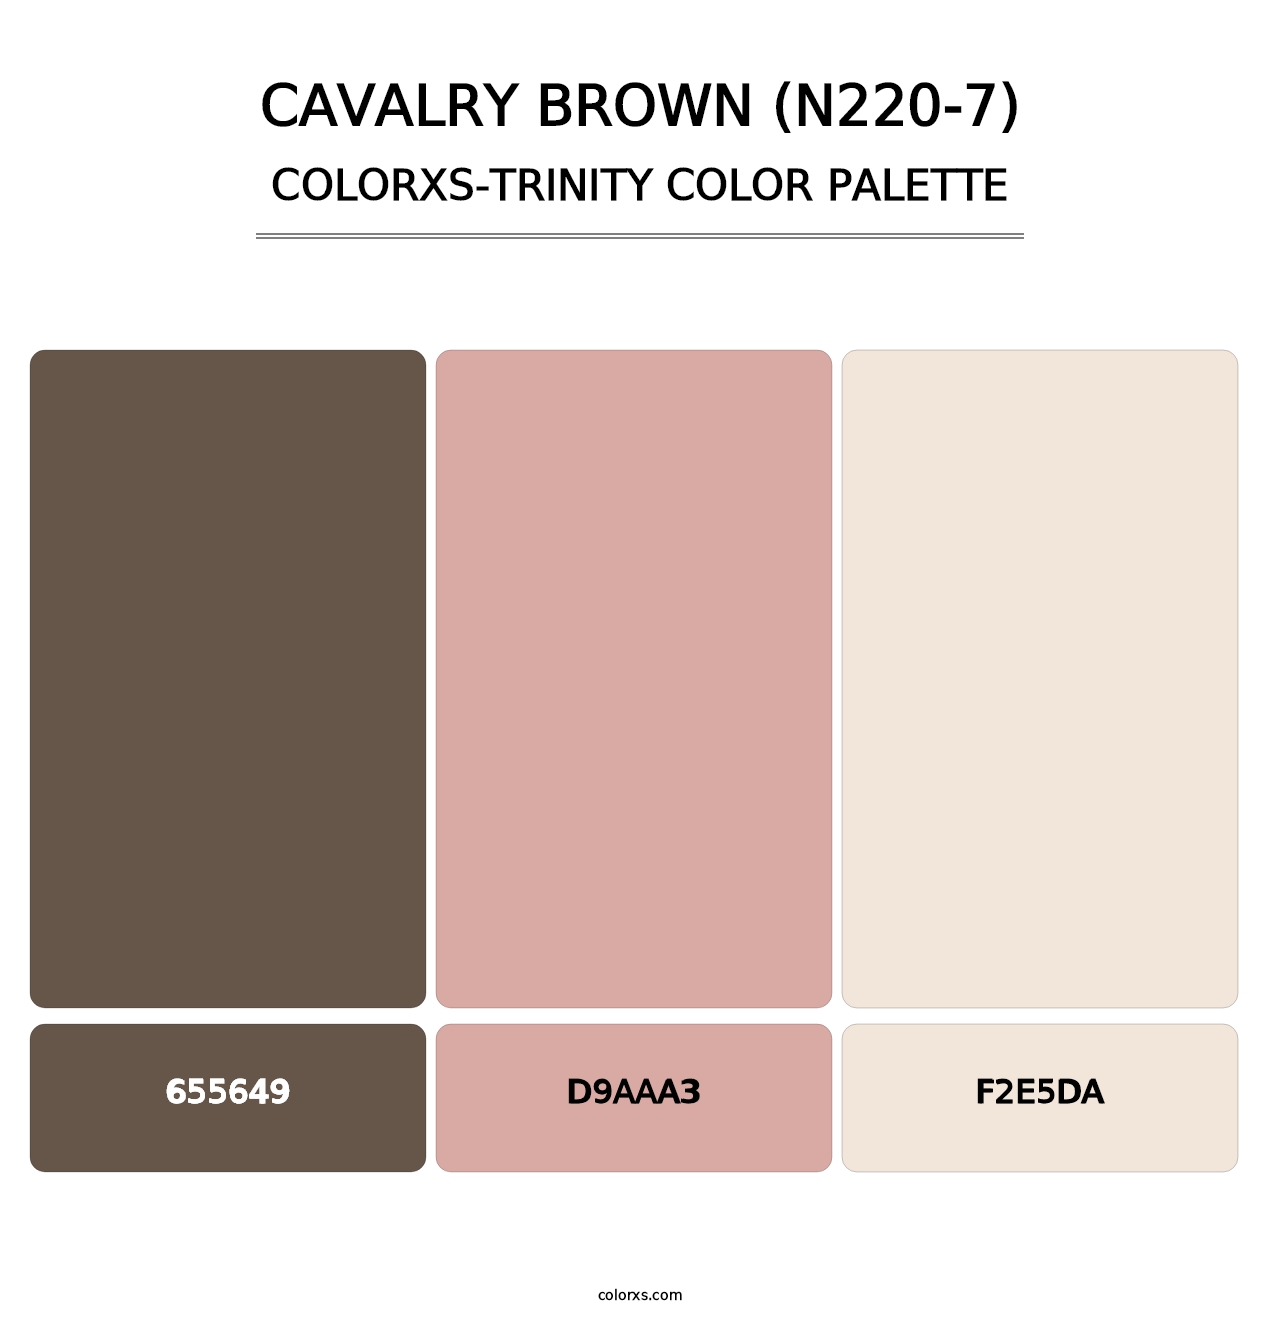 Cavalry Brown (N220-7) - Colorxs Trinity Palette